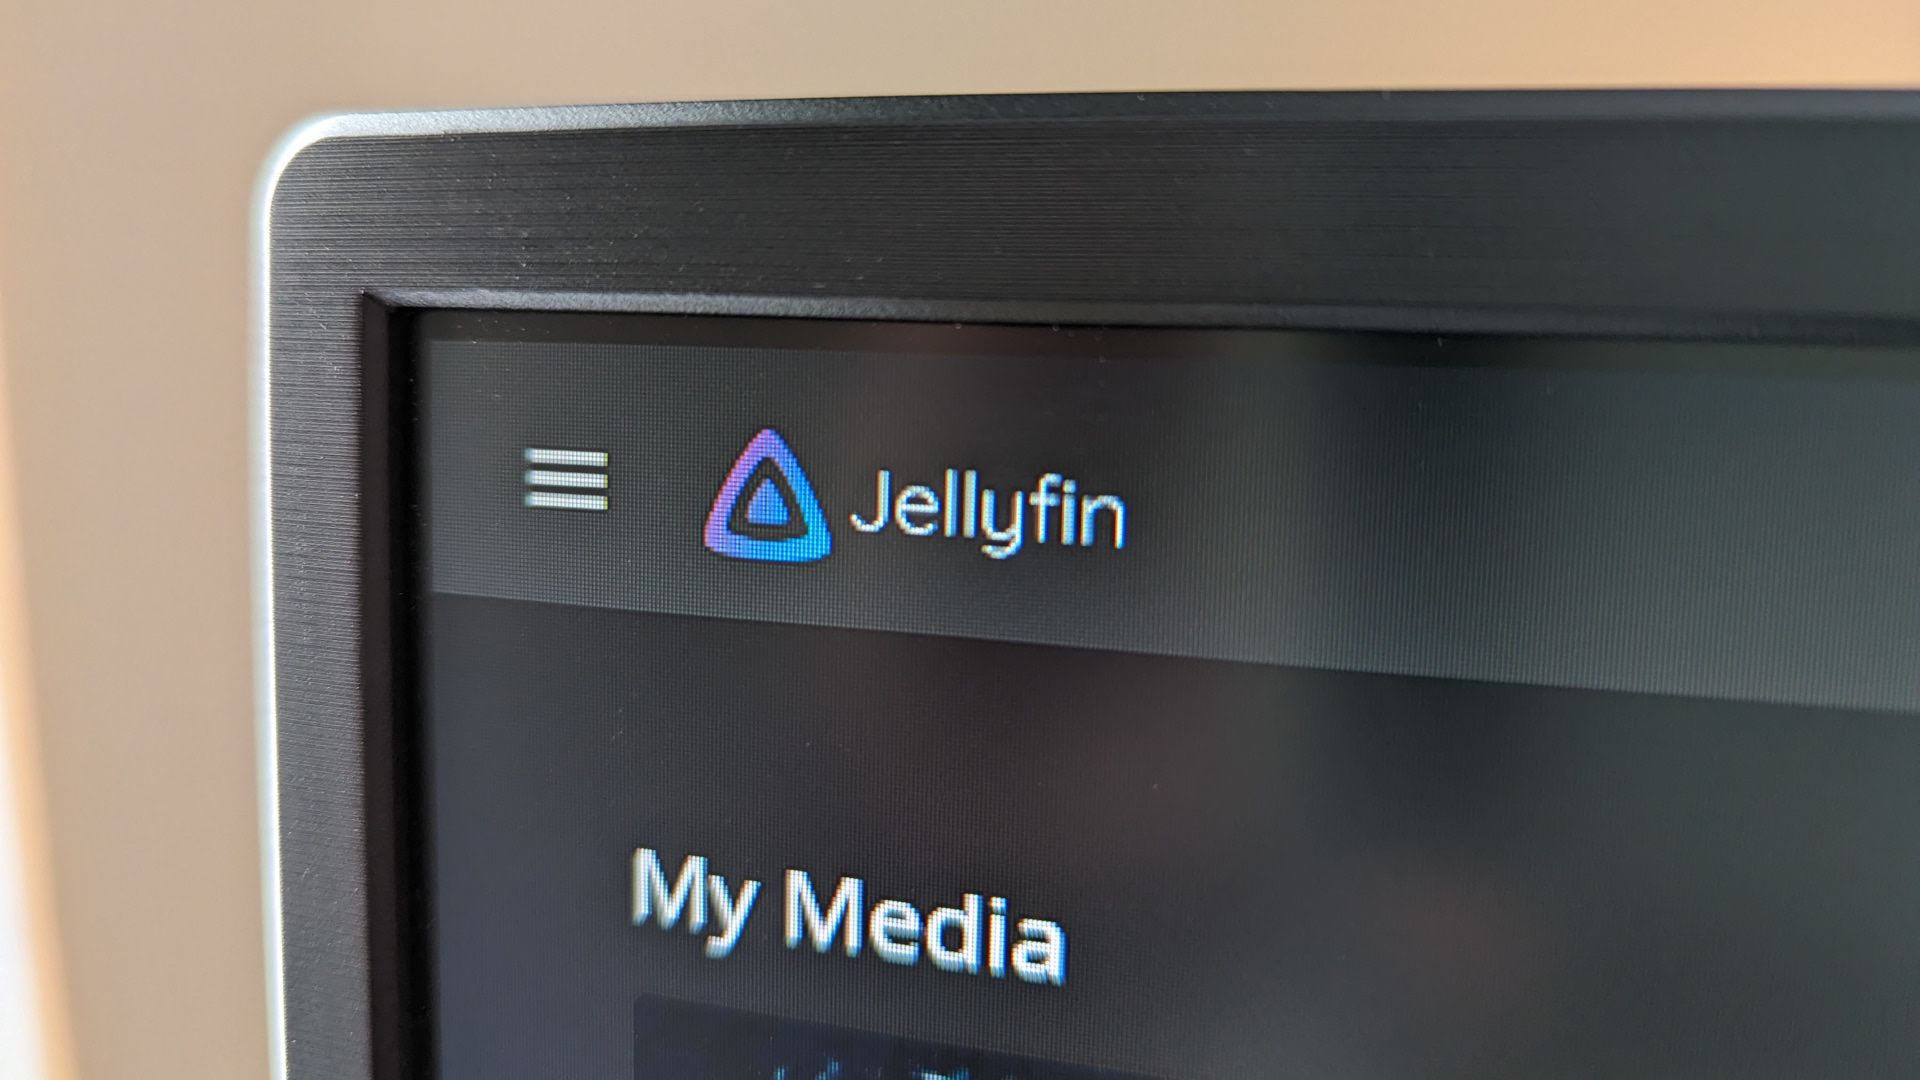 Closeup of a computer monitor with the Jellyfin logo in focus.